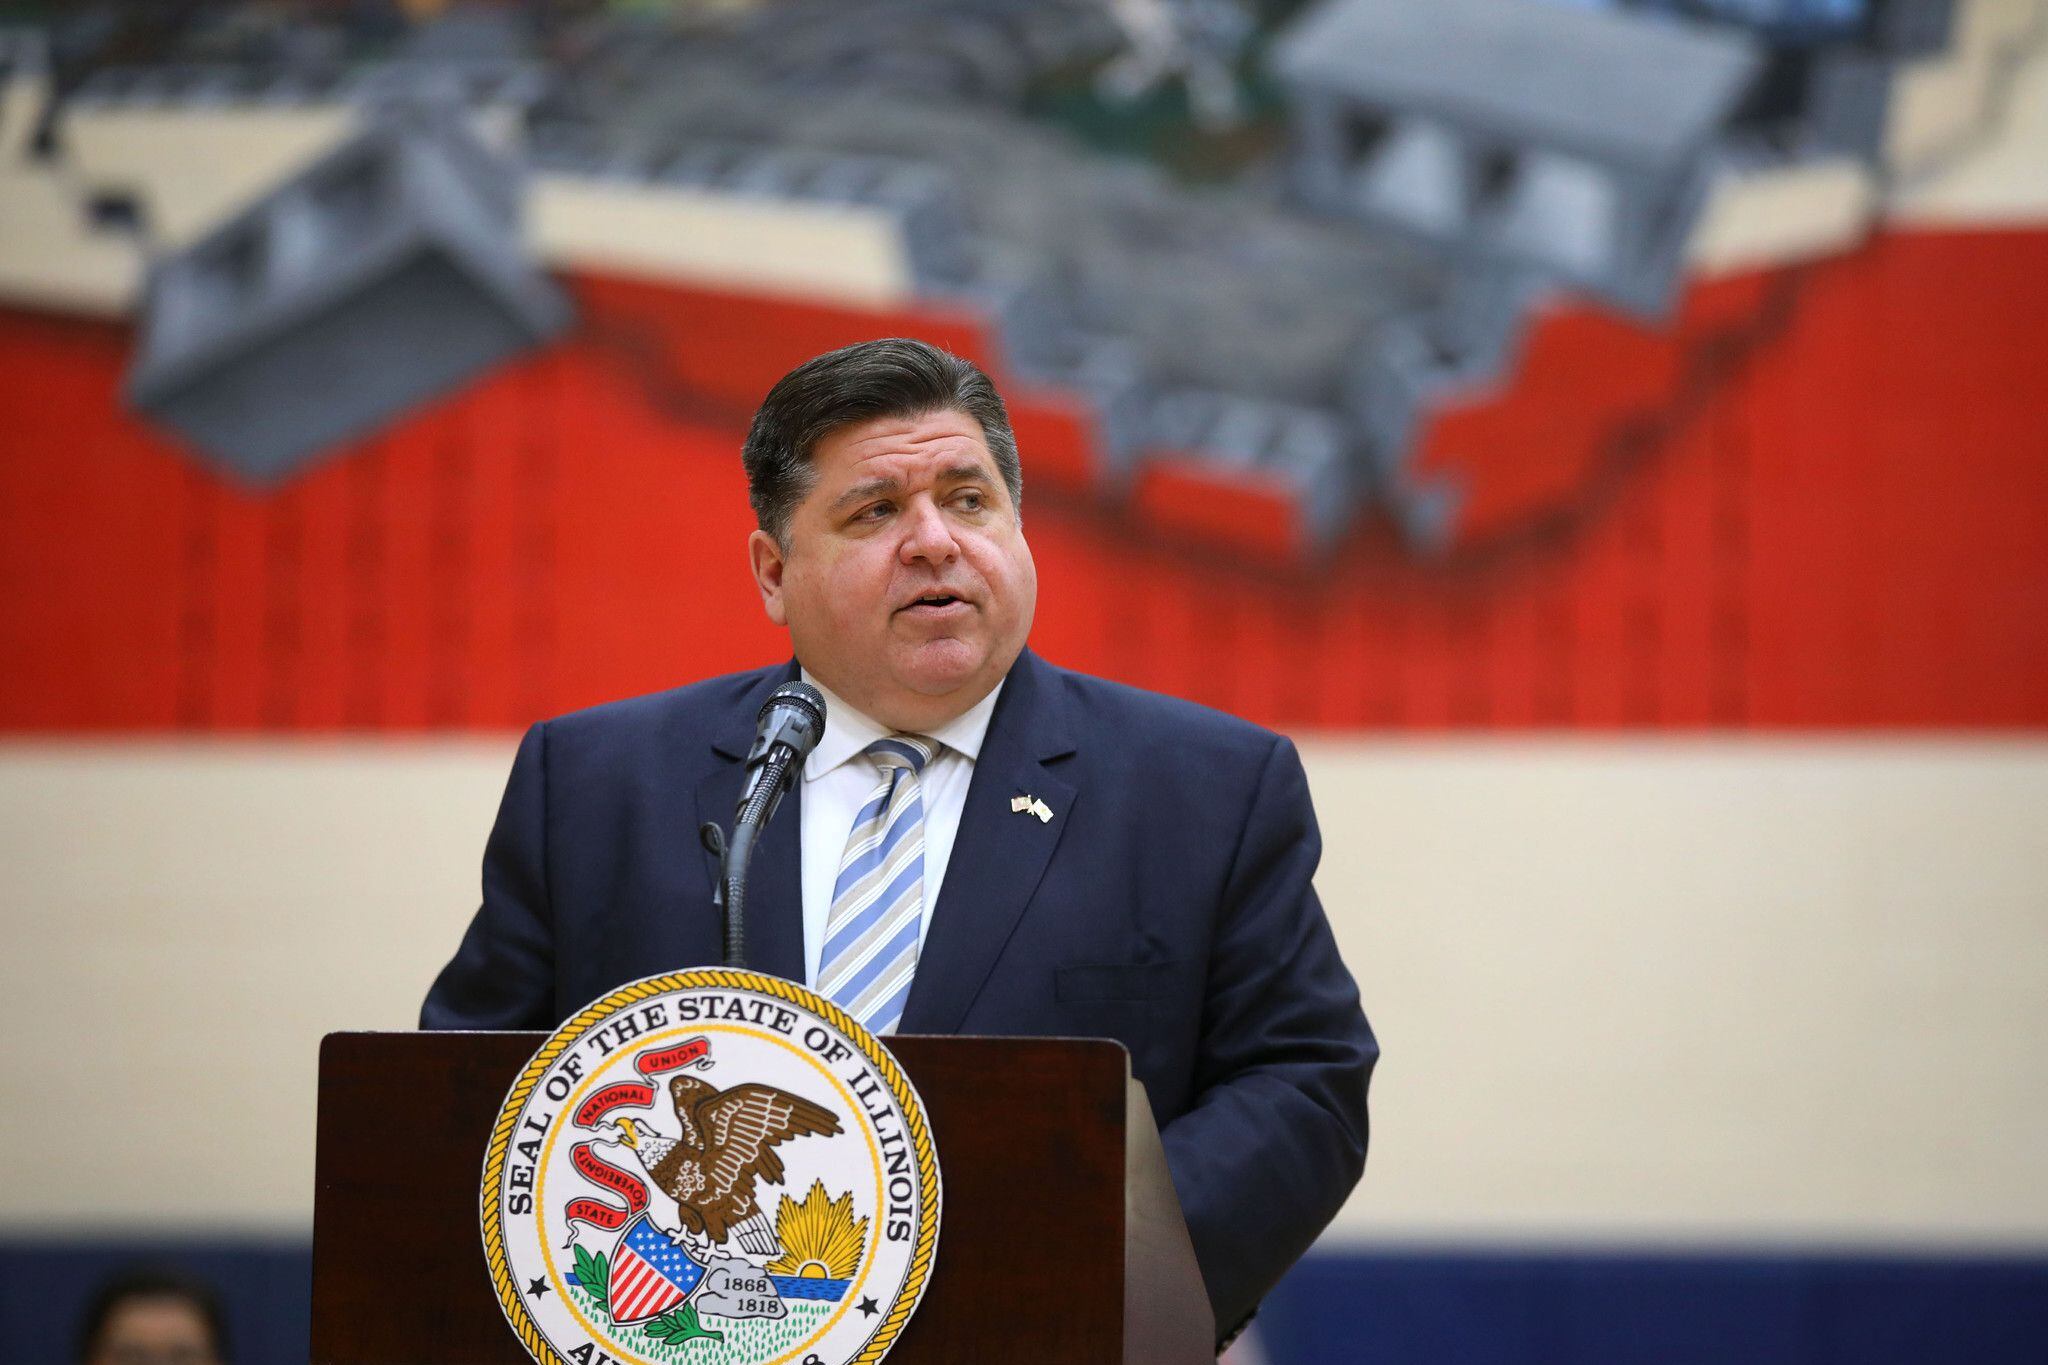 Illinois Governor J.B. Pritzker speaks at a podium in front of a large mural of the Illinois state flag.